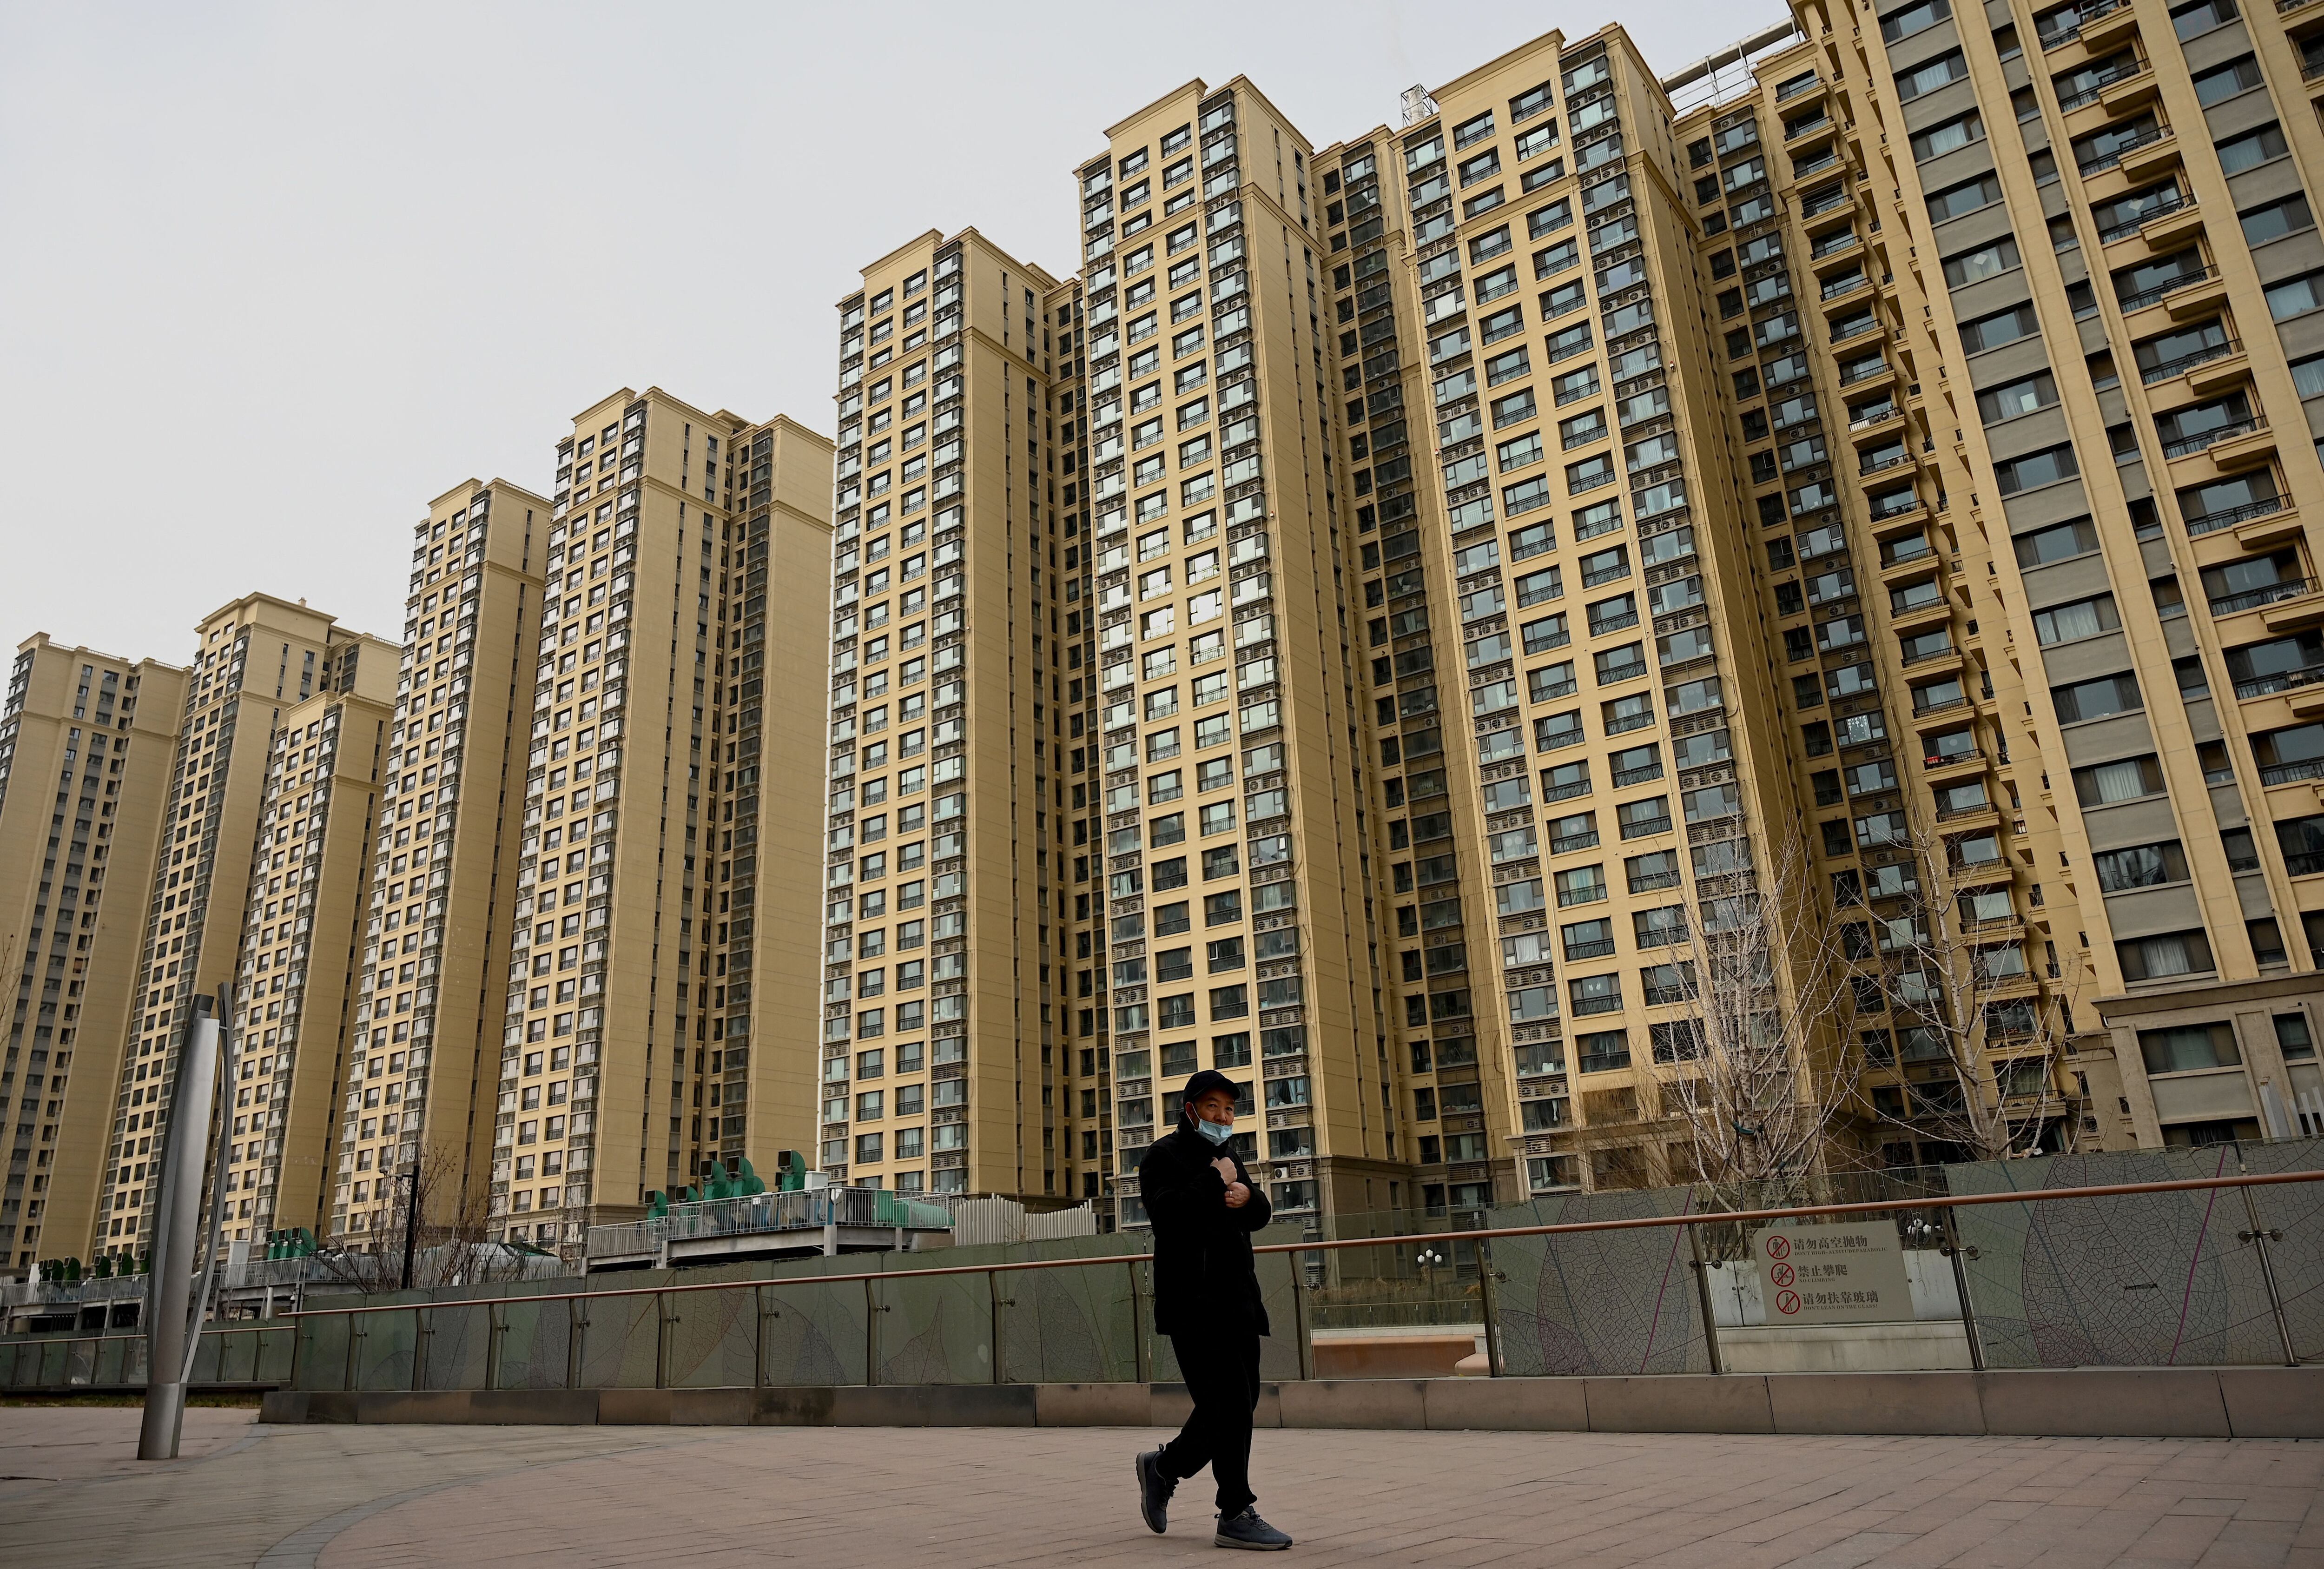 A man walks past a housing complex owned by Chinese real estate developer Evergrande in Beijing, on December 8, 2021. (Photo by Noel Celis/AFP).